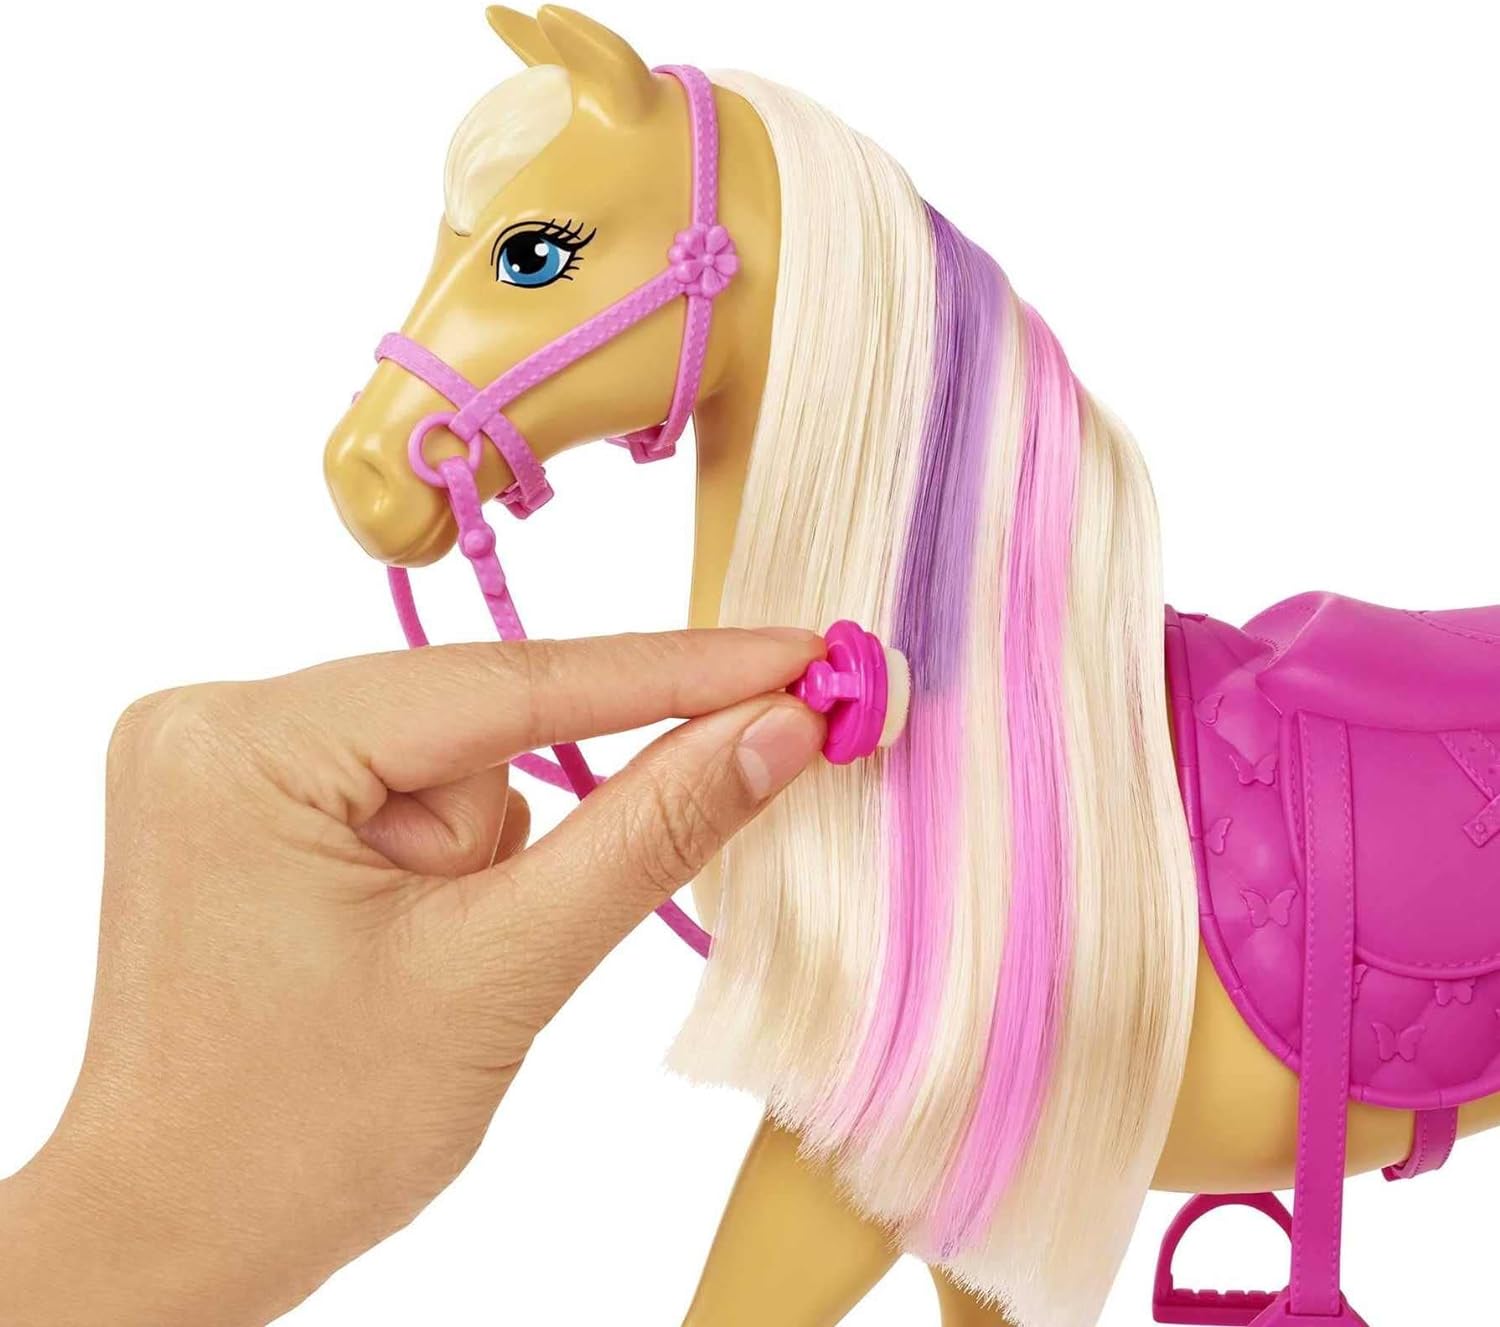 Barbie Groom 'n Care Horses Playset with Barbie Doll (Blonde 11.5-Inch), 2 Horses, 20+ Grooming and Hairstyling Accessories, Gift for 3-7 Years, GXV77